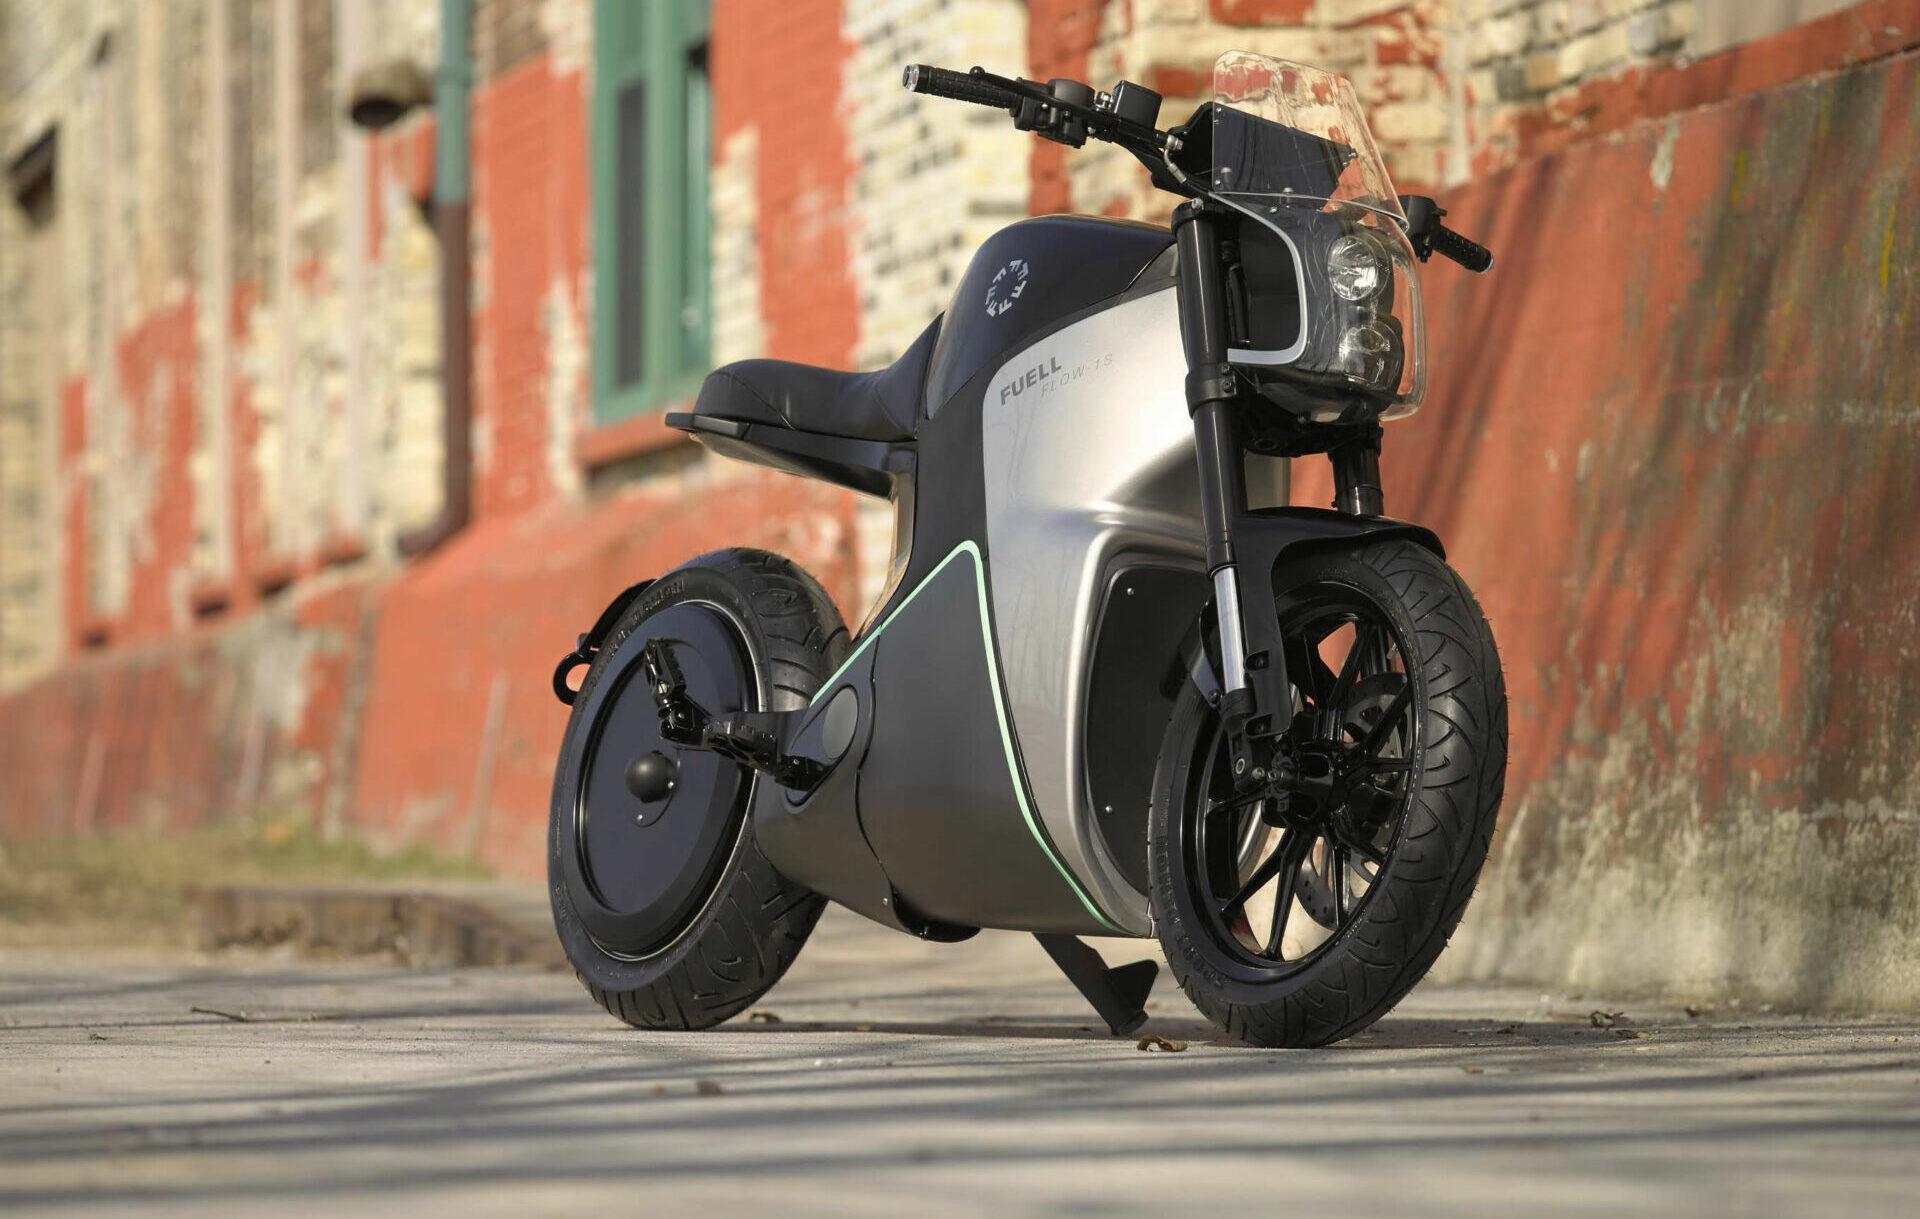 A Fuell Fllow electric motorcycle. Photo courtesy Fuell.